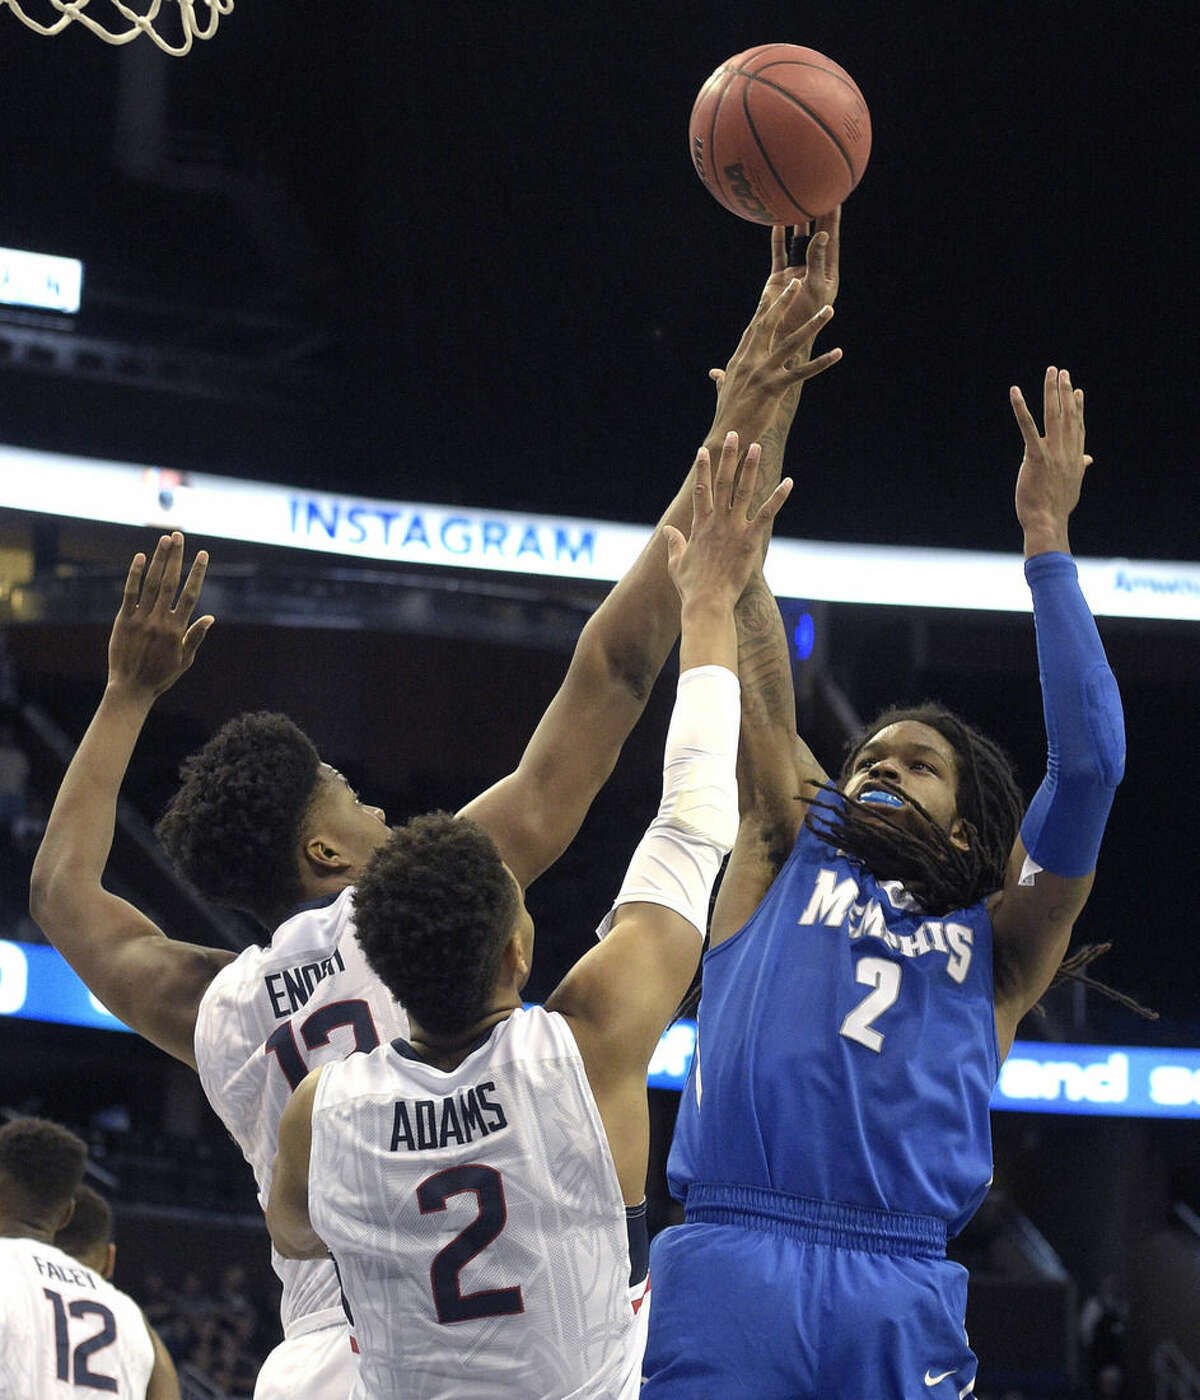 Memphis forward Shaq Goodwin (2) goes up for a shot in front of Connecticut forward Steven Enoch (13) and guard Jalen Adams (2) during the first half of an NCAA college basketball game in the finals of the American Athletic Conference men's tournament in Orlando, Fla., Sunday, March 13, 2016. (AP Photo/Phelan M. Ebenhack)